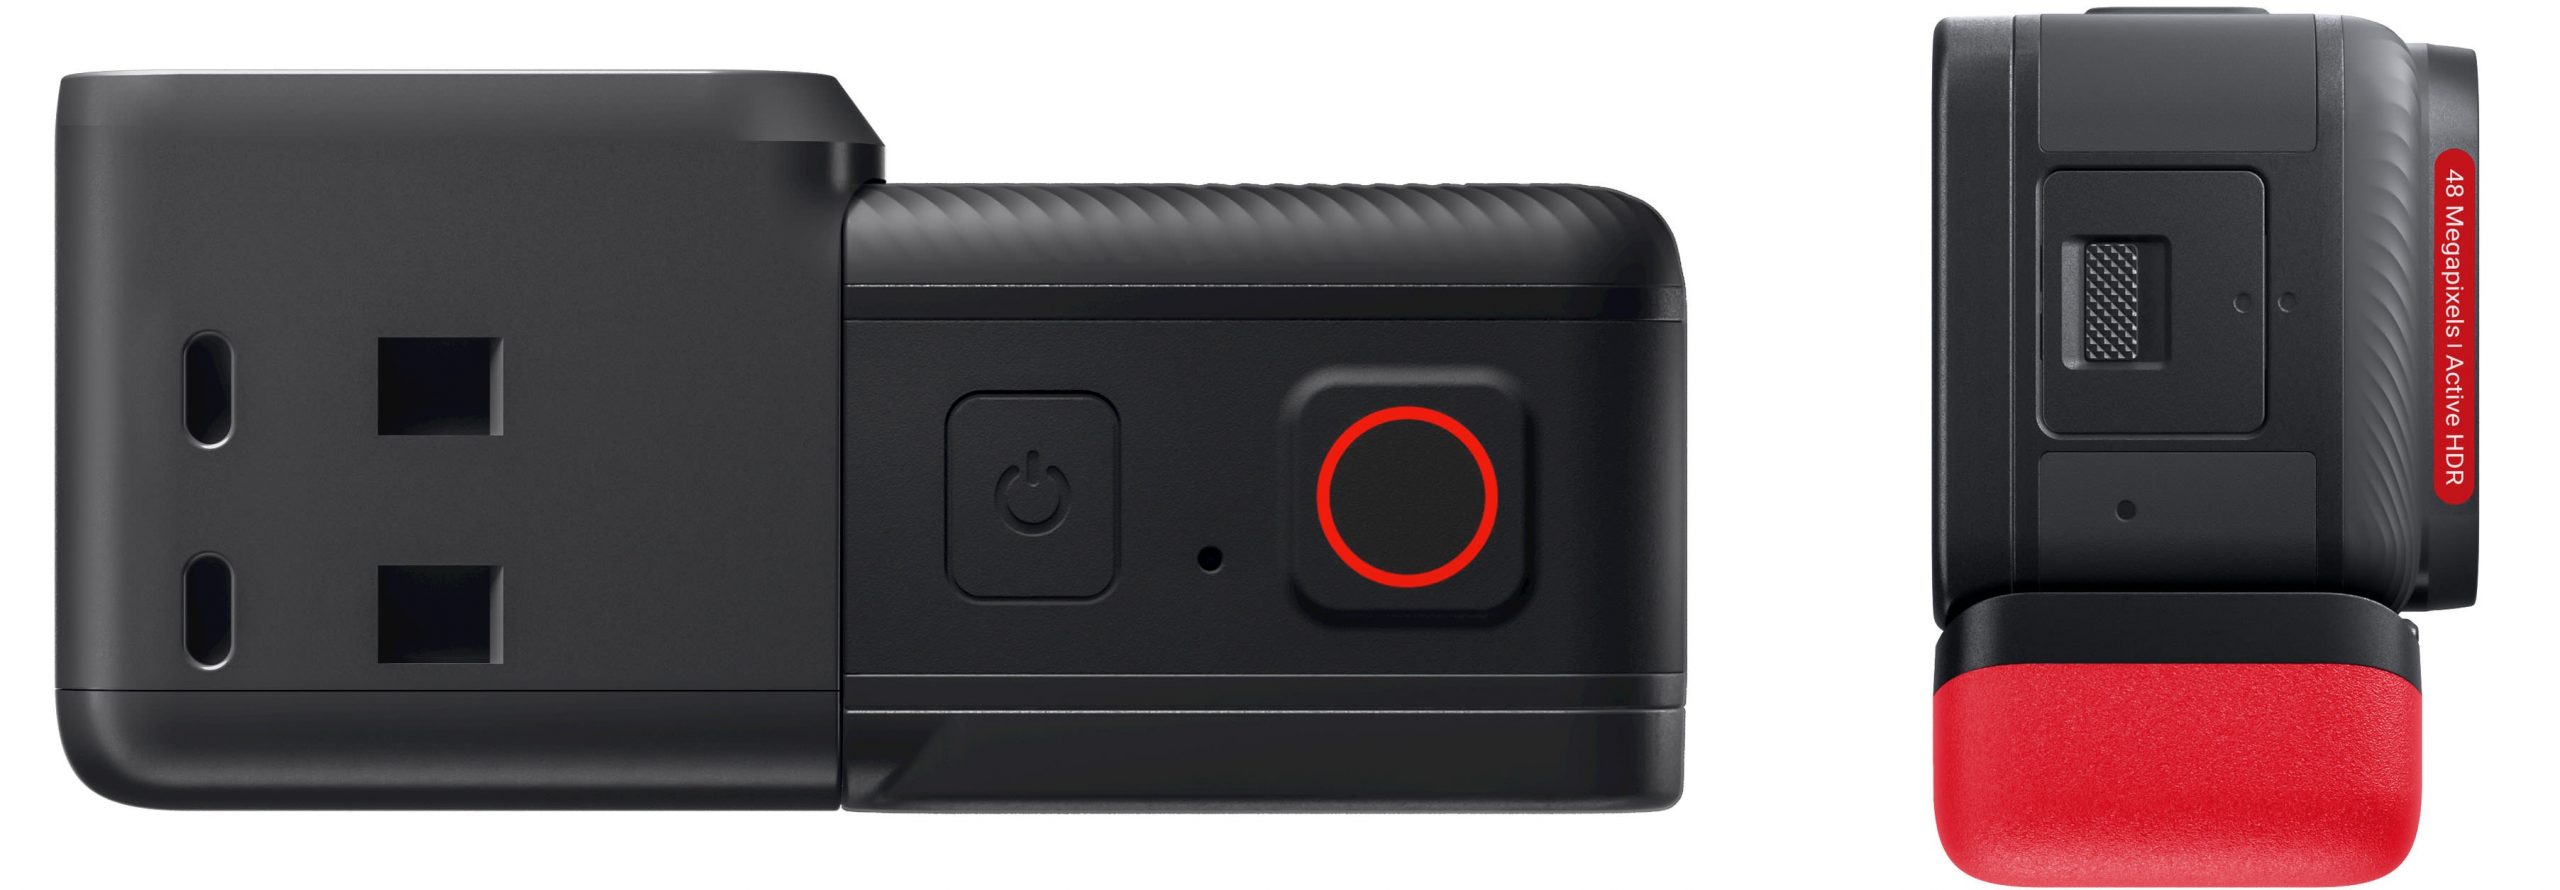 Insta360 ONE RS modular action camera announced with more powerful